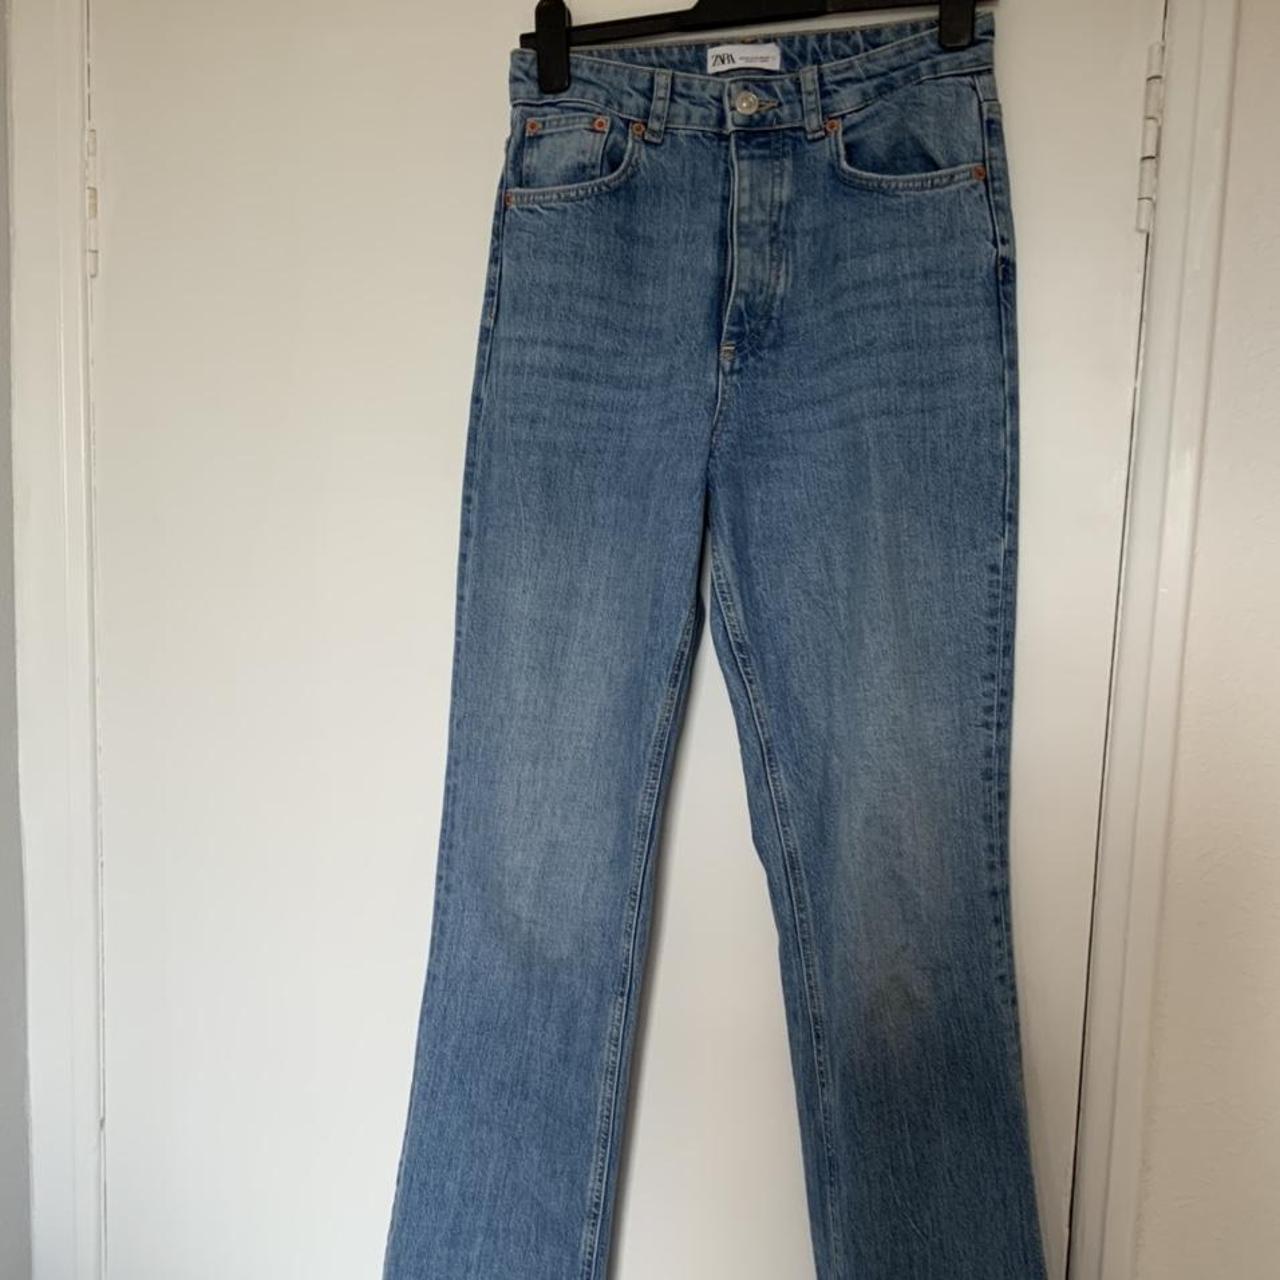 Zara - Flared denim jeans. Small grass stain and... - Depop